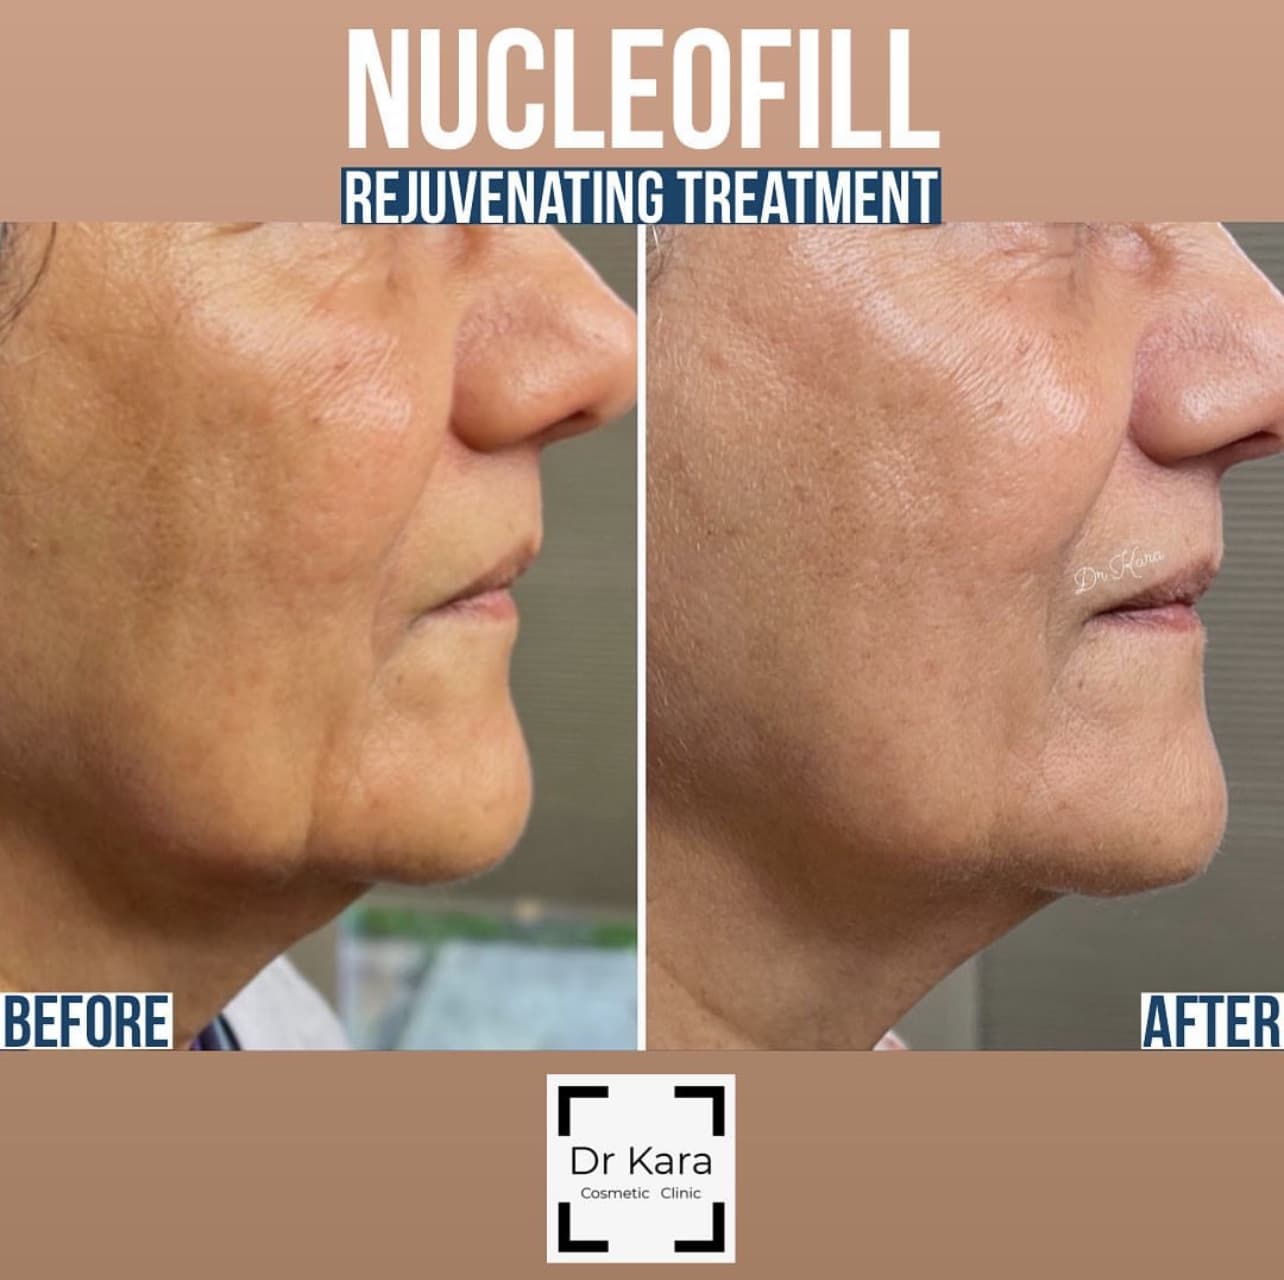 Nucleofill mid to lower face healed result by Dr Kara Cosmetic Clinic , Norwich, Norfolk